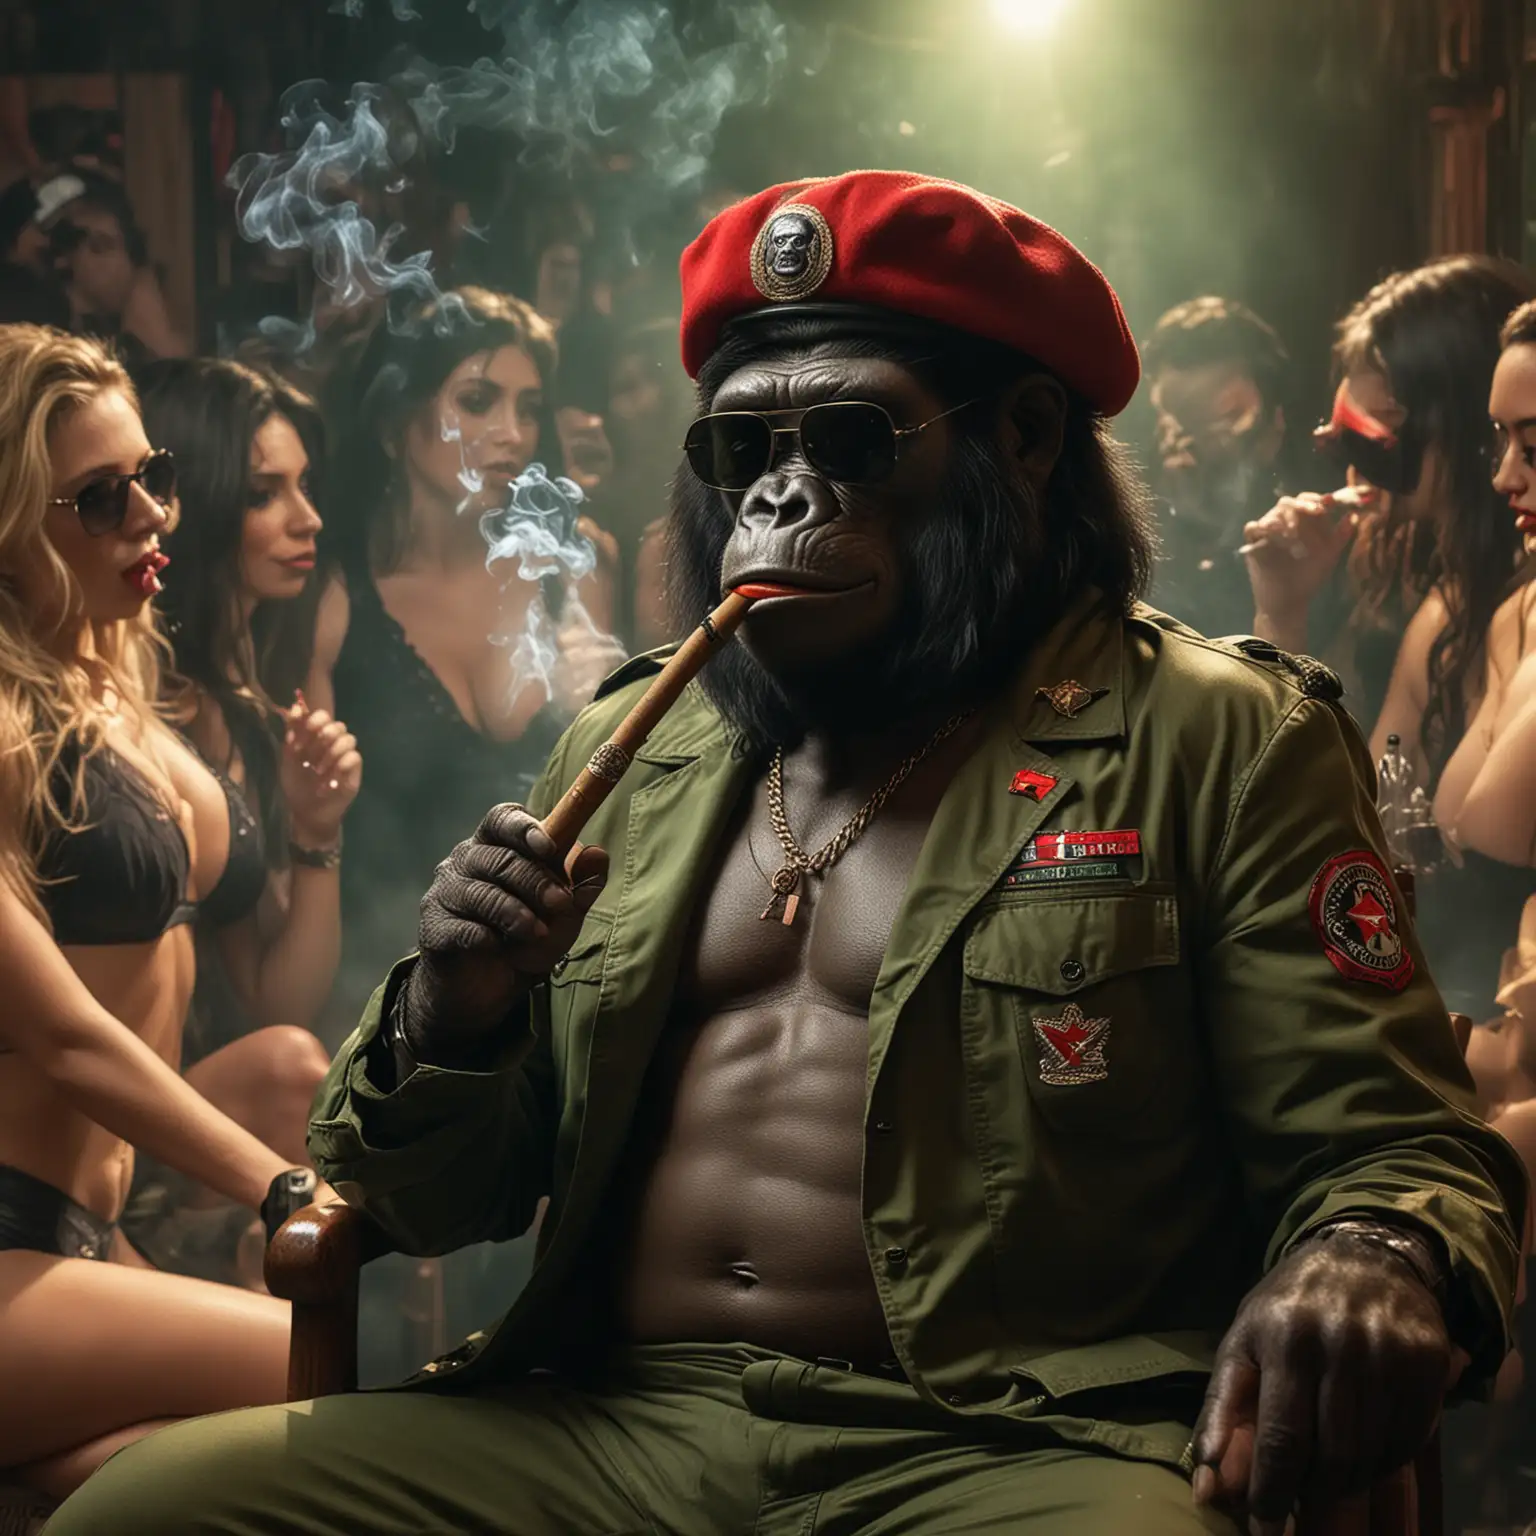 The gorilla is Sitting on a chair surrounded by sexy  women in bikini inside a nightclub environment. he is lighting up a cuban cigar. The gorilla wears dark sunglasses and military green jacket like Che Guevara. he is wearing black beret hat. he smokes. Close up. cinematic. FACING THE CAMERA. party-latino. real, perfect lightning, detailed